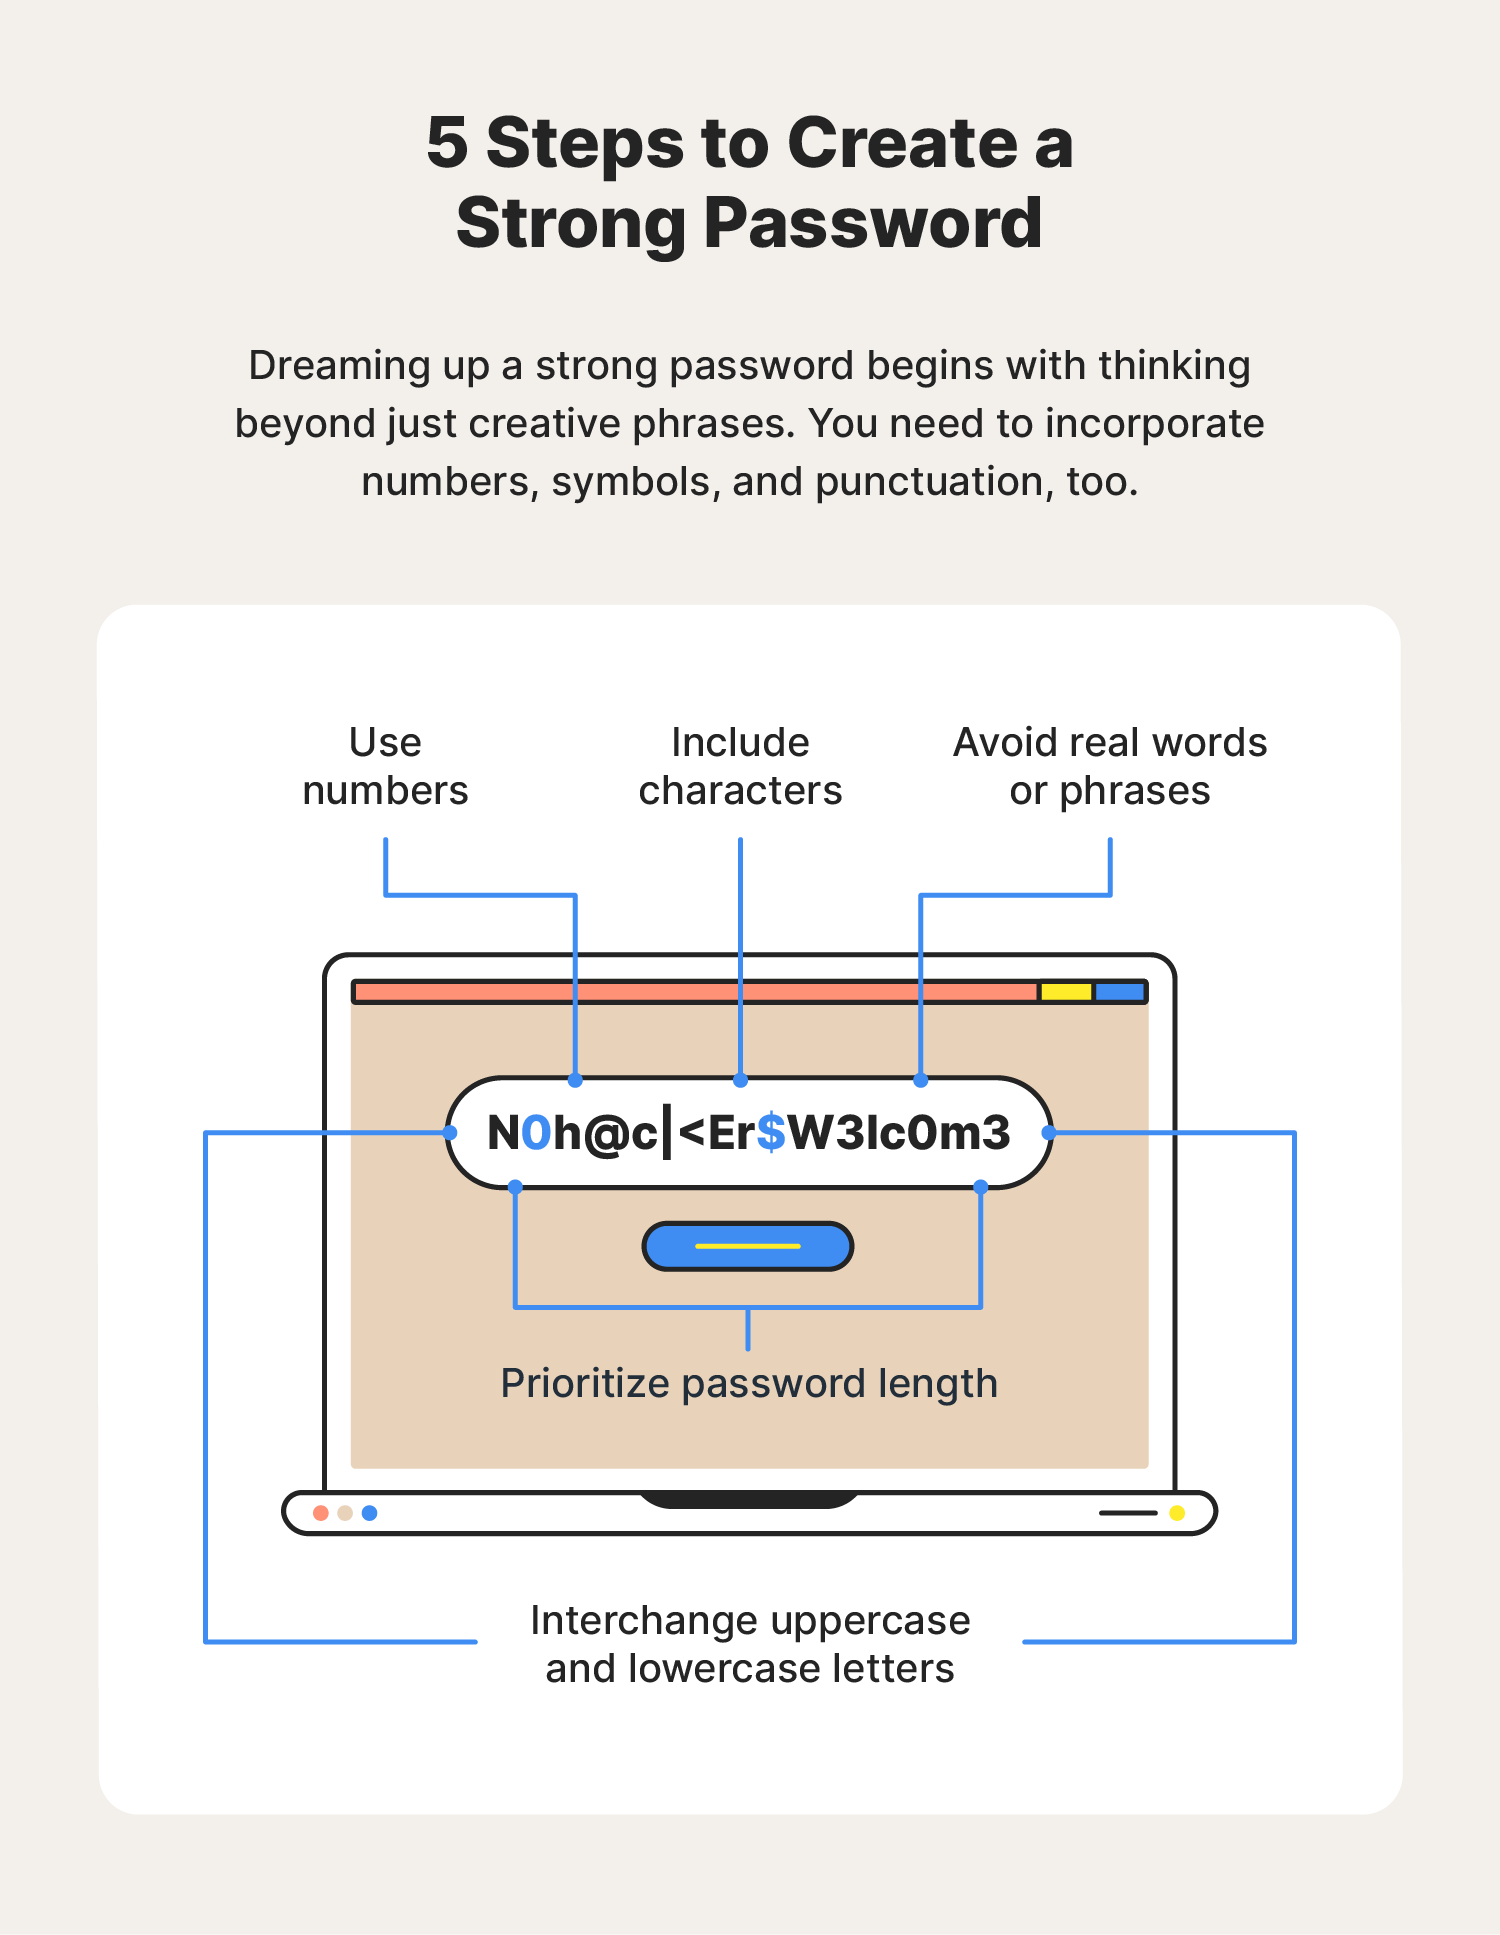 Change your passwords for important accounts (e.g., email, banking)
Ensure strong and unique passwords for each account